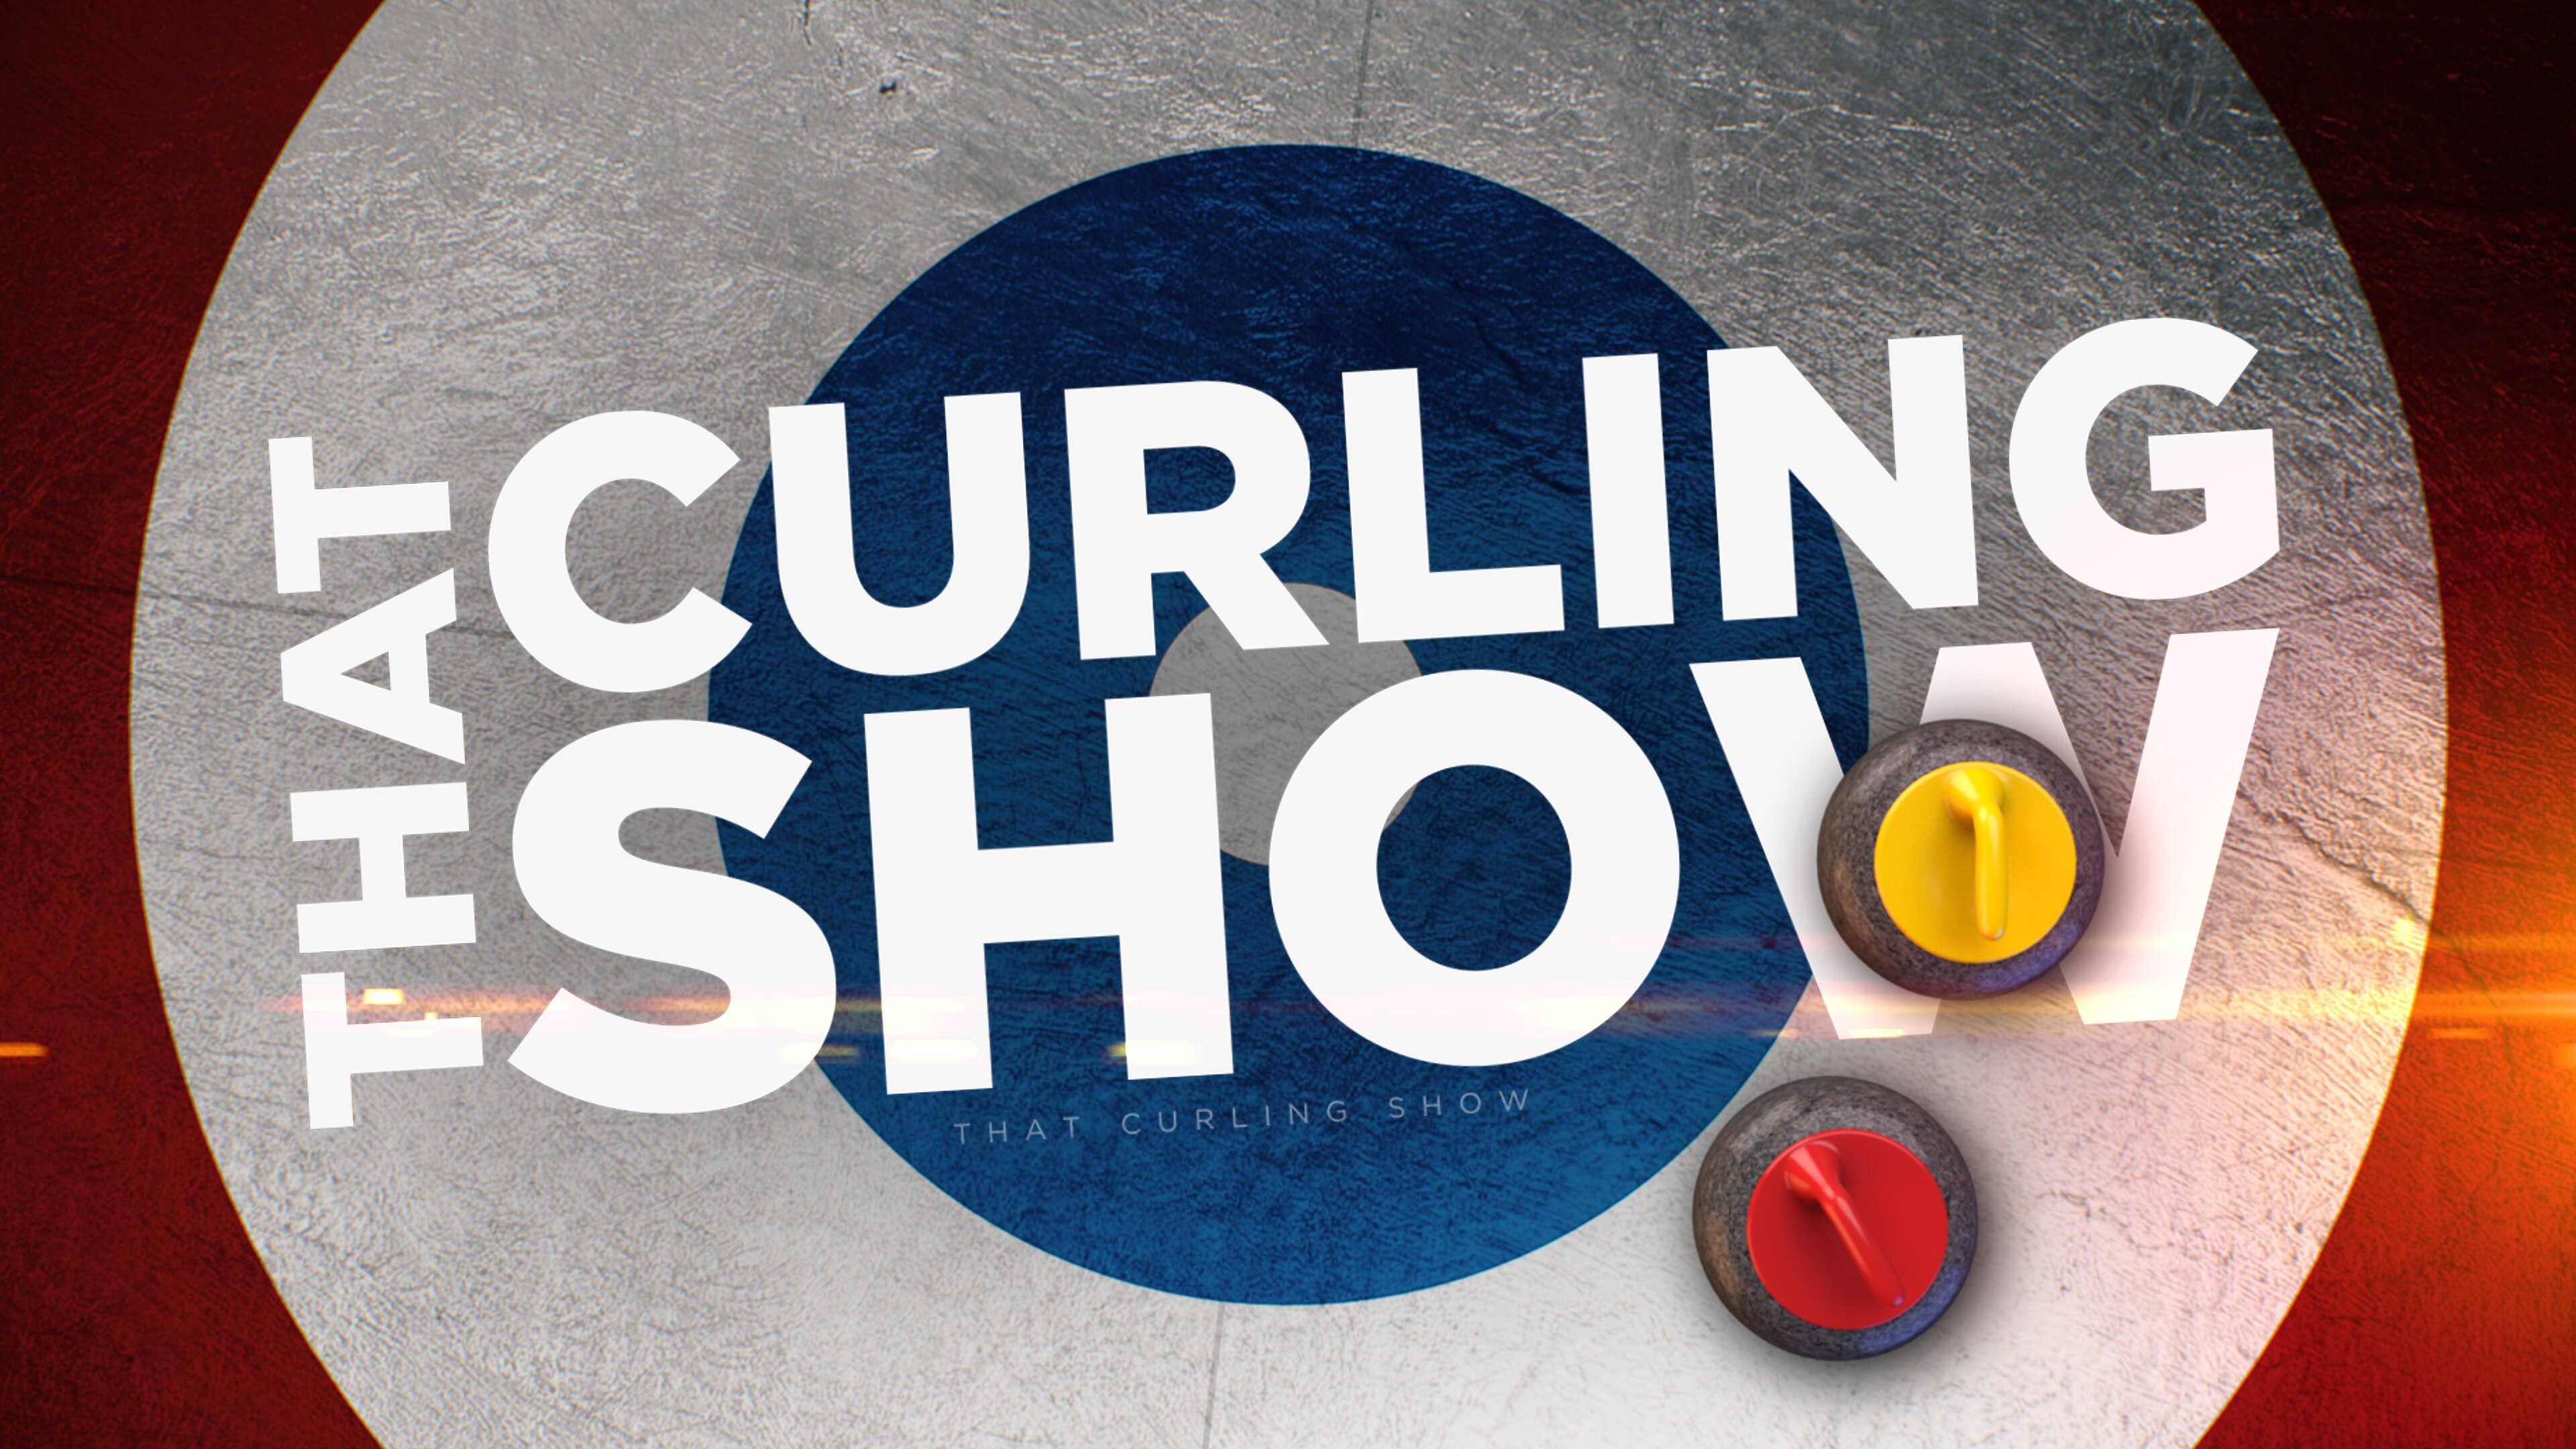 cbc live streaming curling